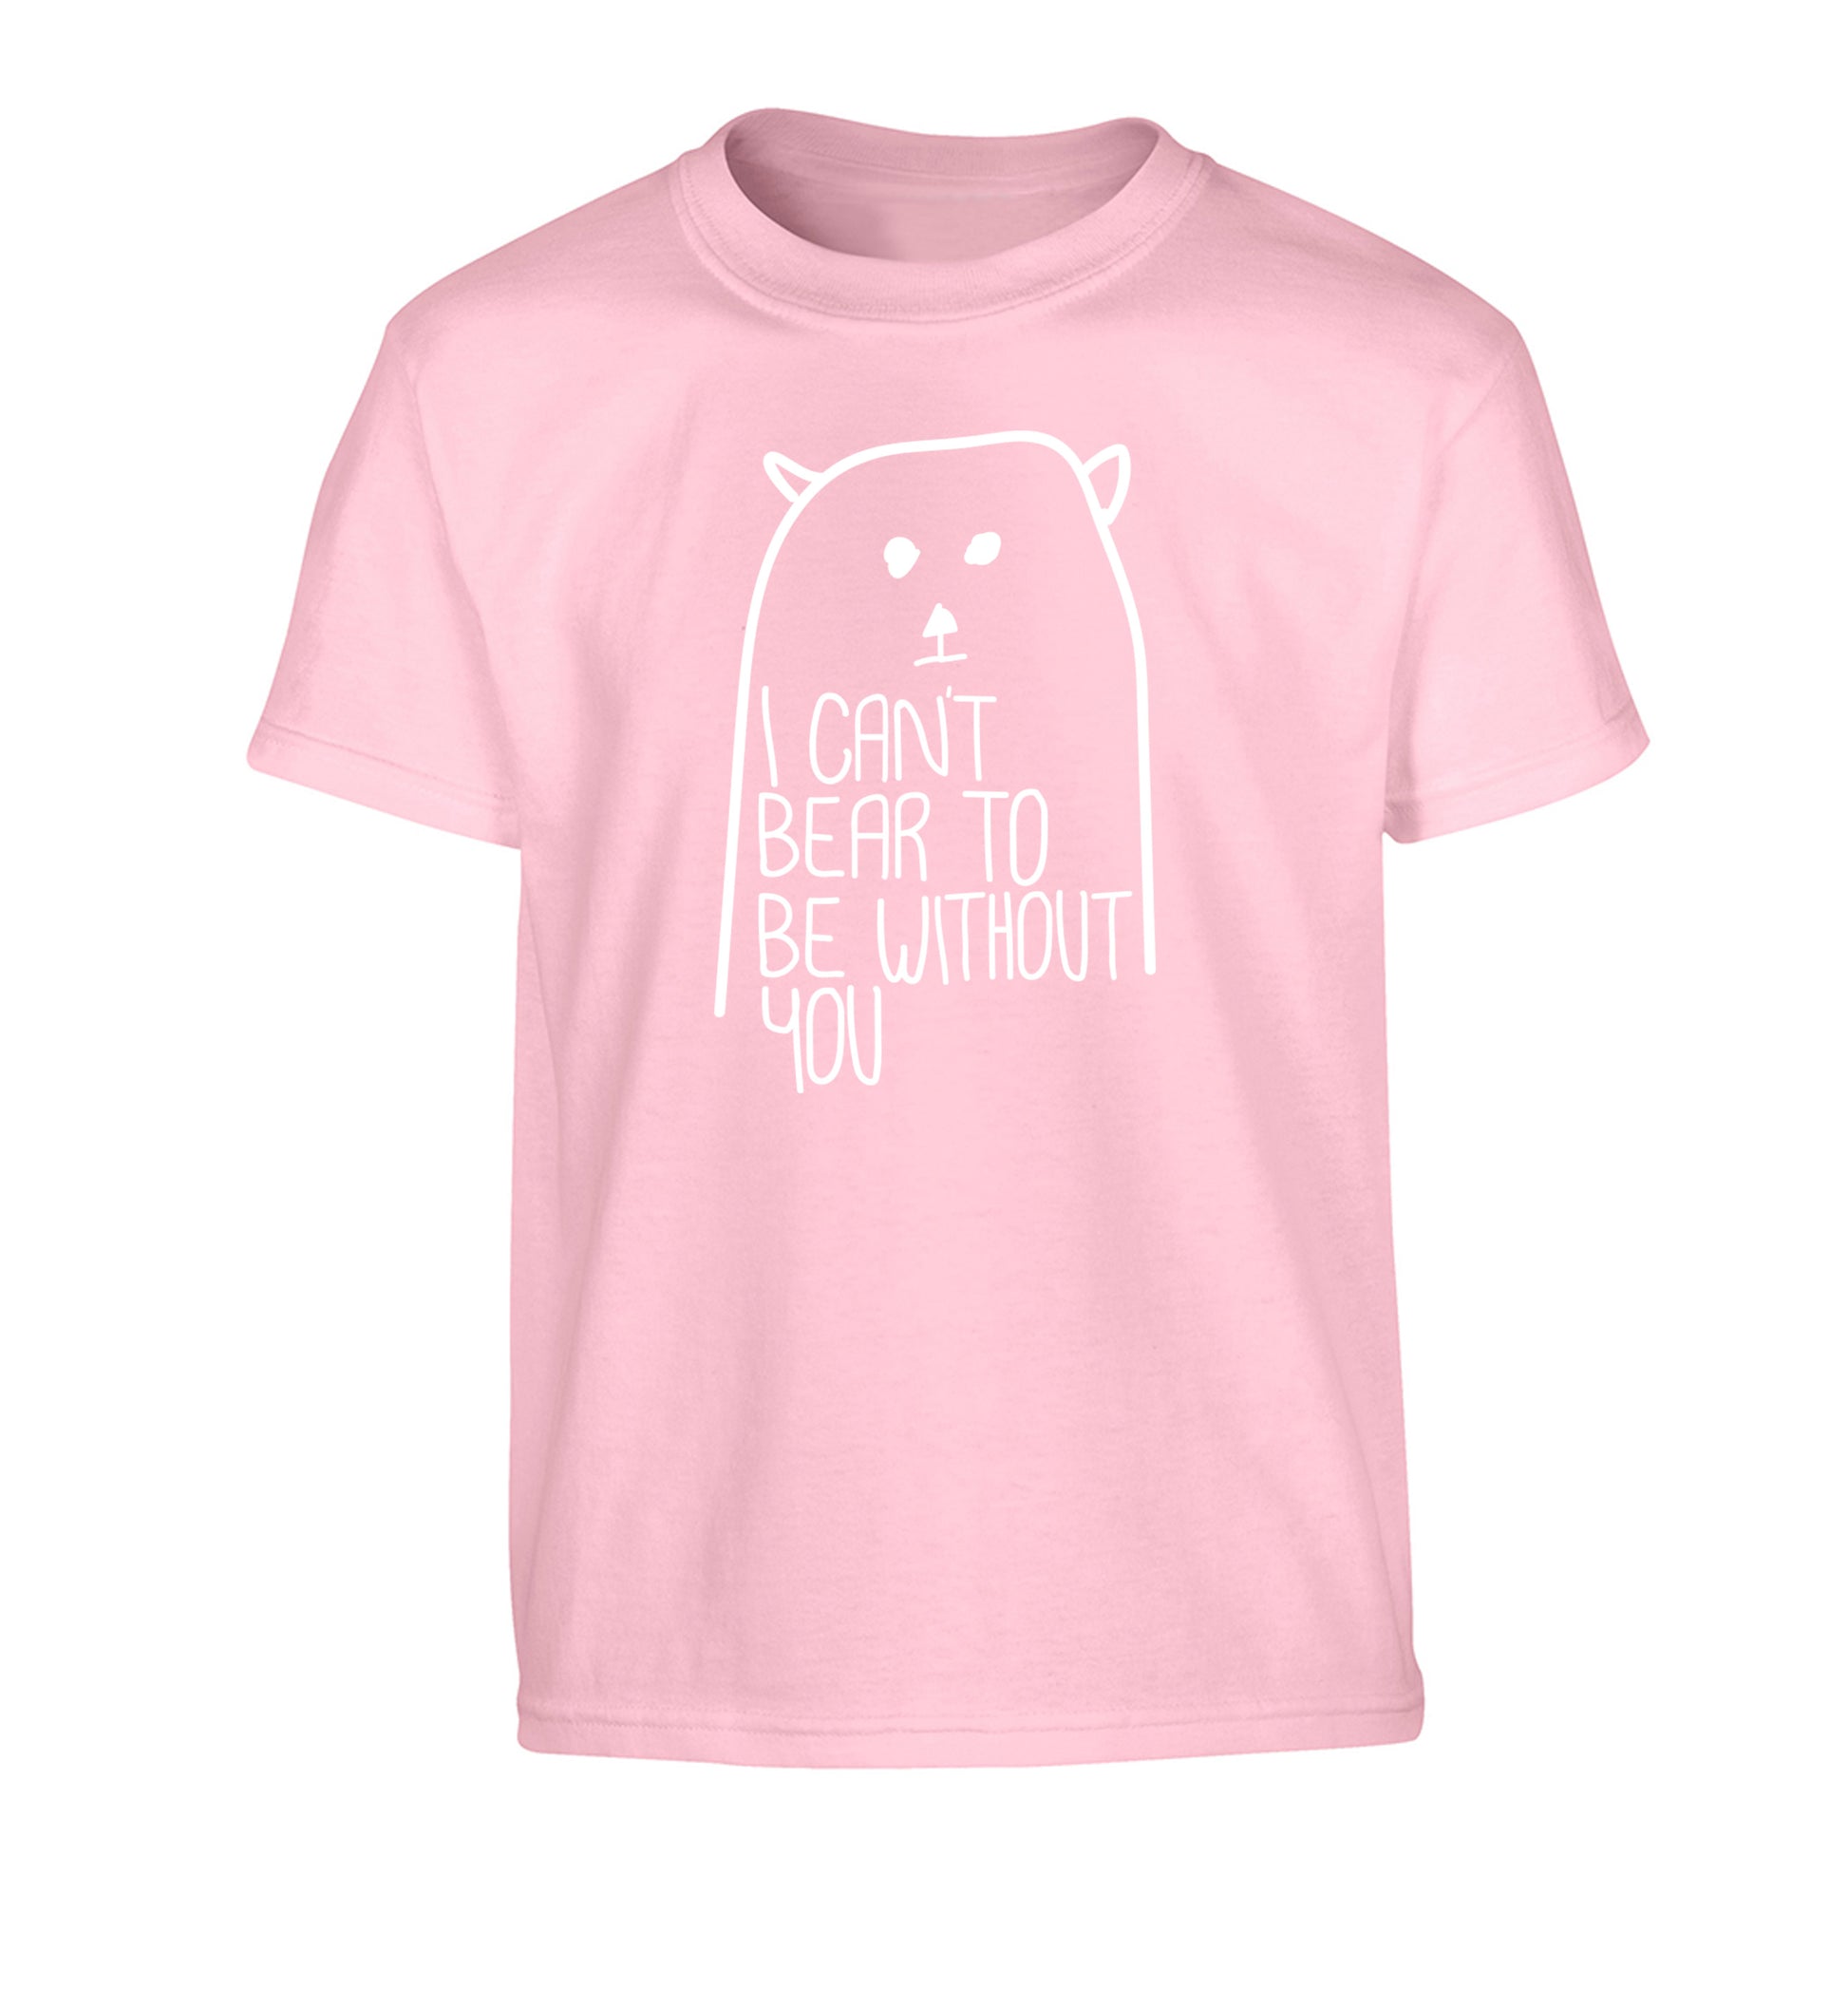 I can't bear to be without you Children's light pink Tshirt 12-13 Years